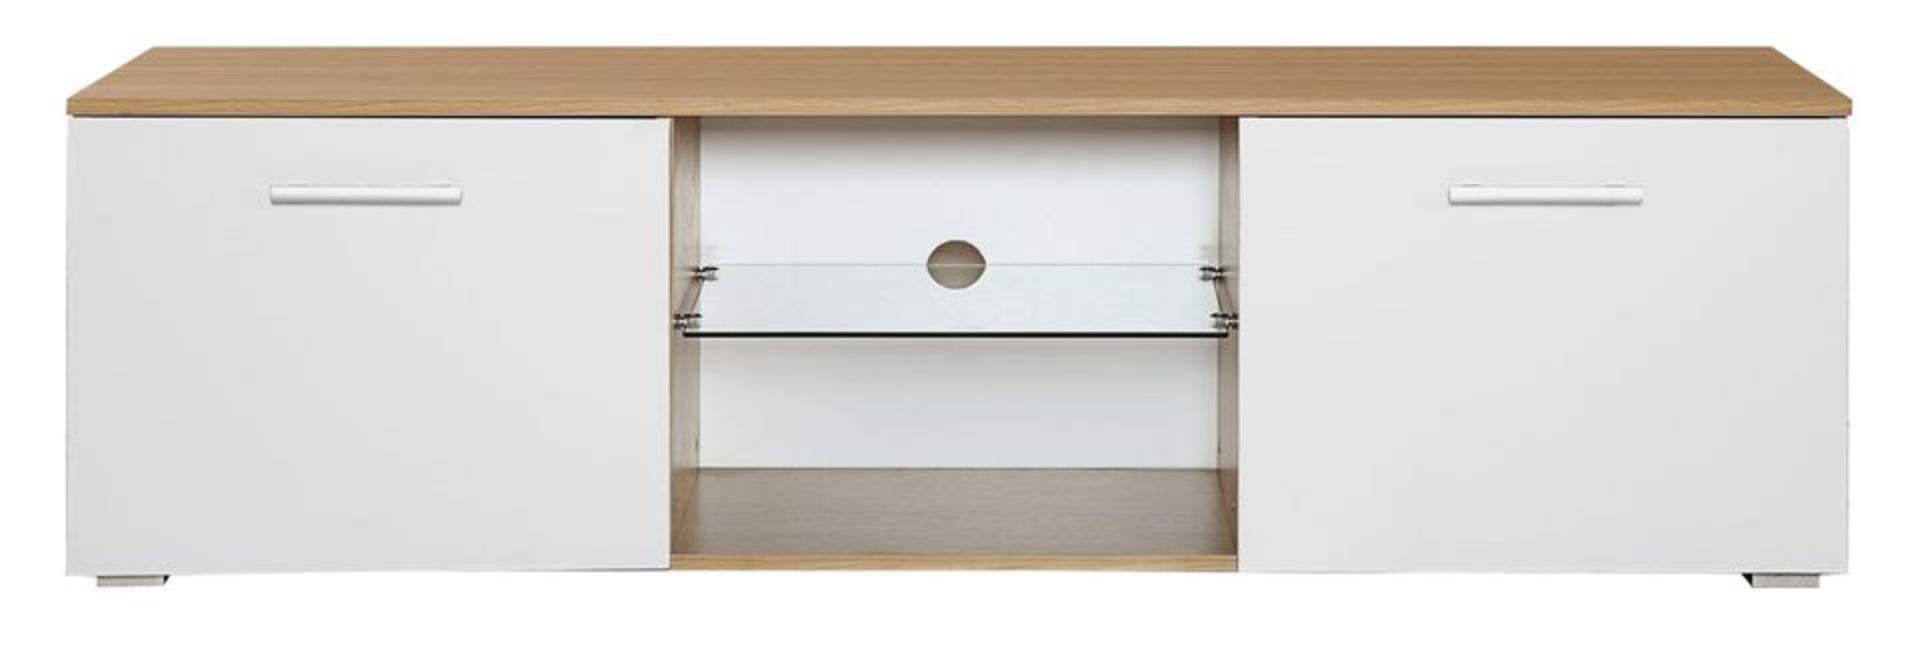 BRAND NEW 160CM WHITE ON OAK TV STAND (TV32) - Image 8 of 10